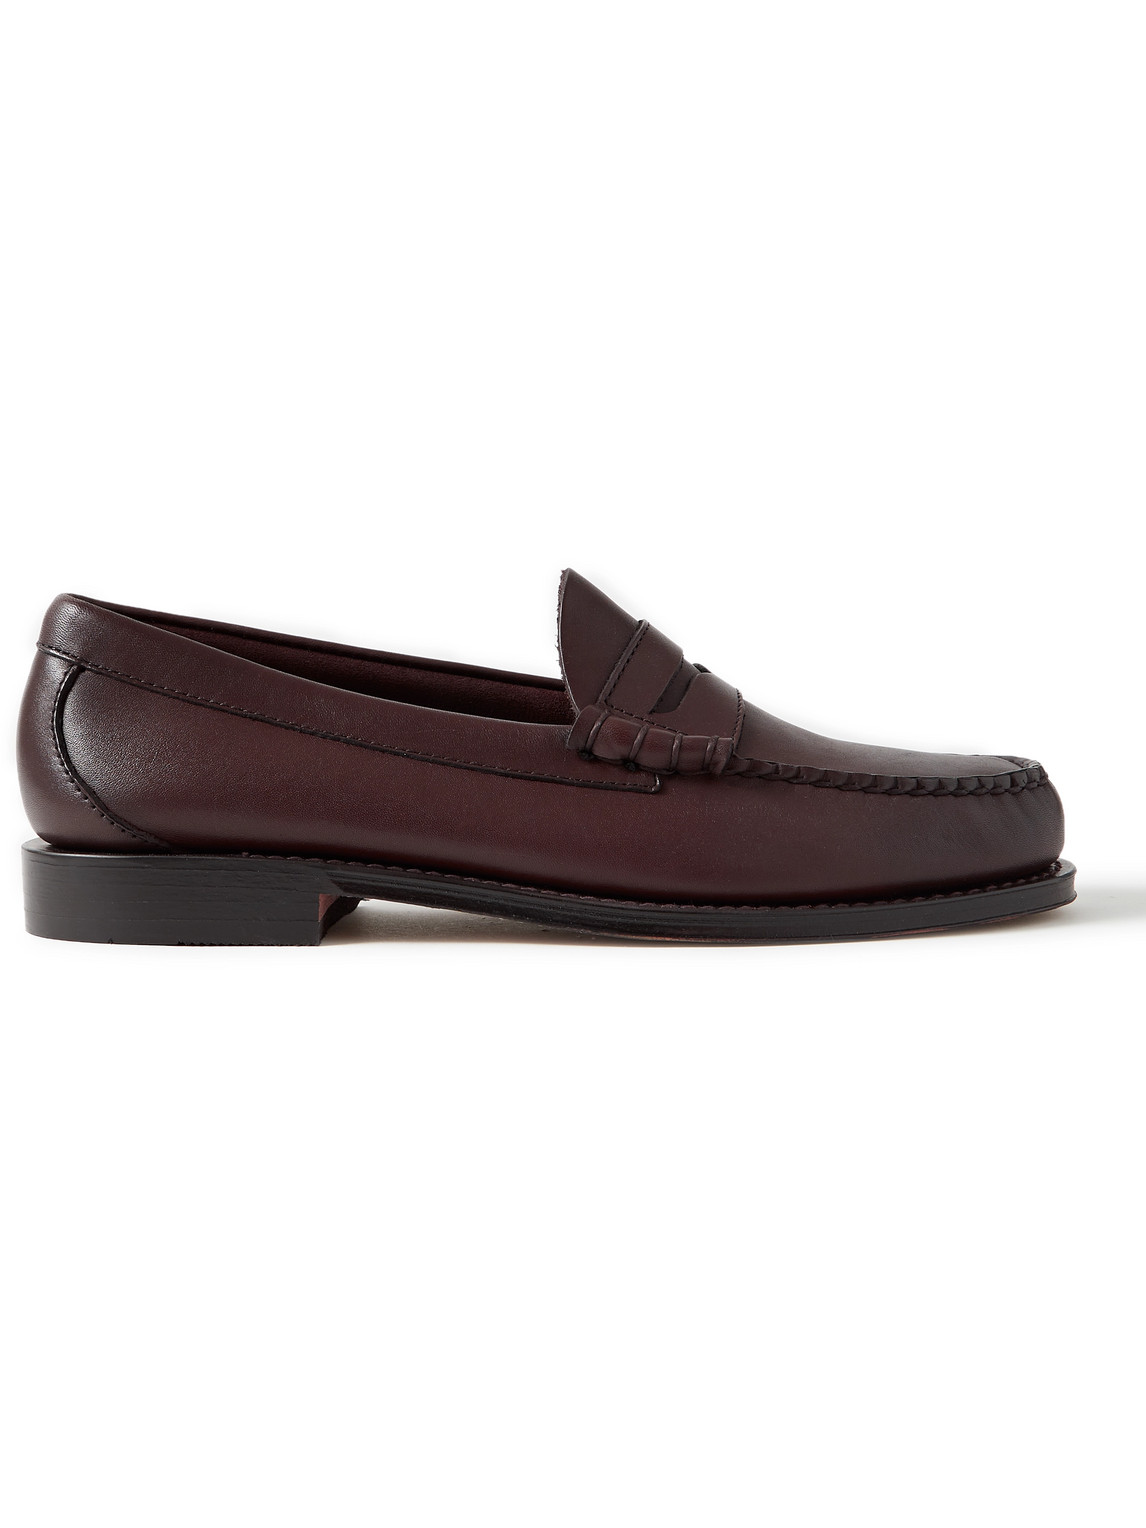 G.H. Bass & Co. - Weejuns Heritage Larson Leather Penny Loafers - Men - Brown - UK 6 von G.H. Bass & Co.